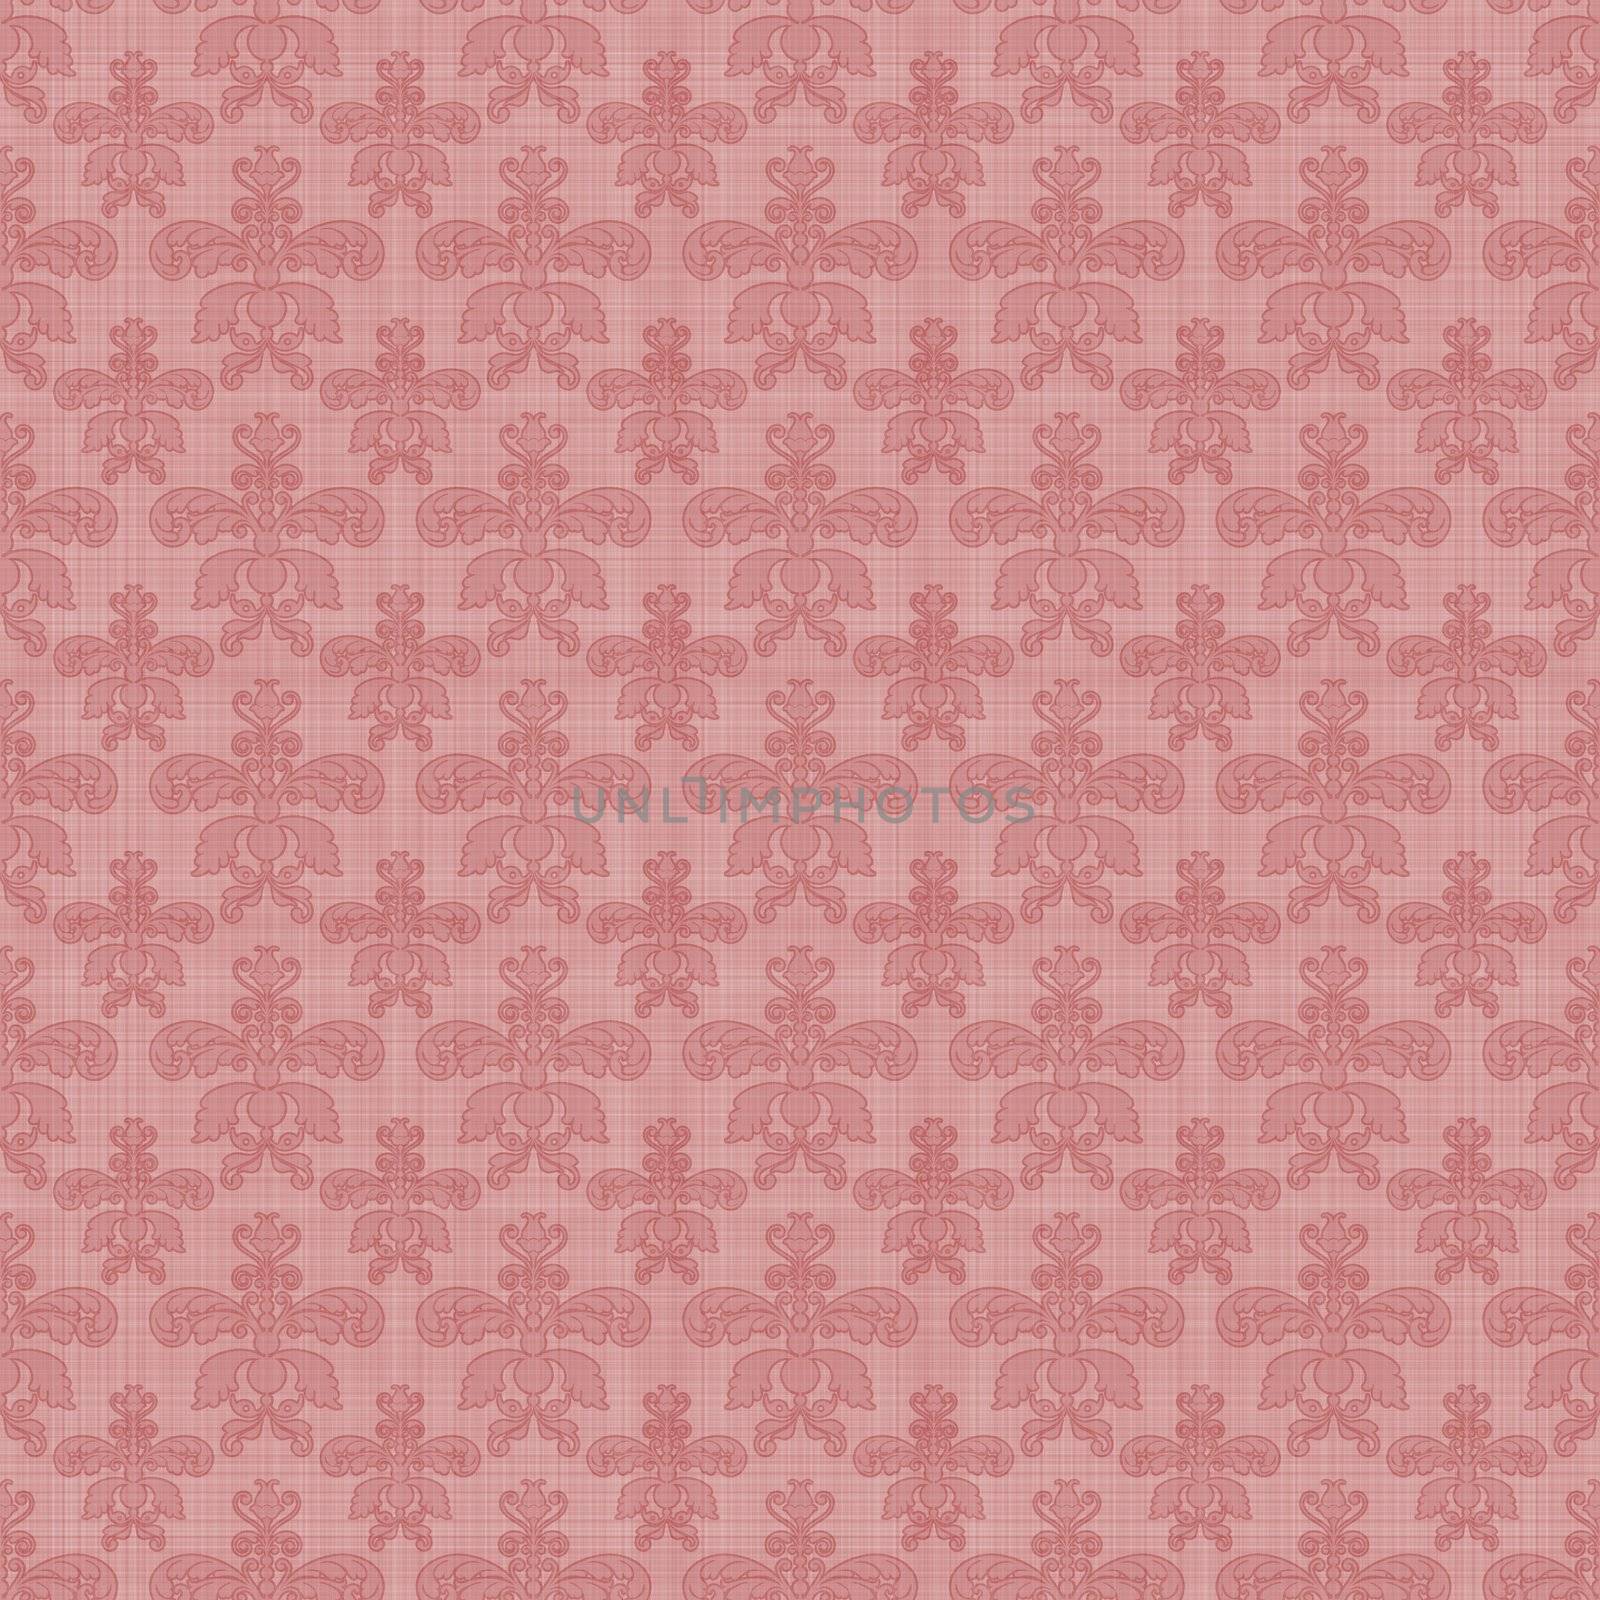 Seamless Pink Damask by SongPixels